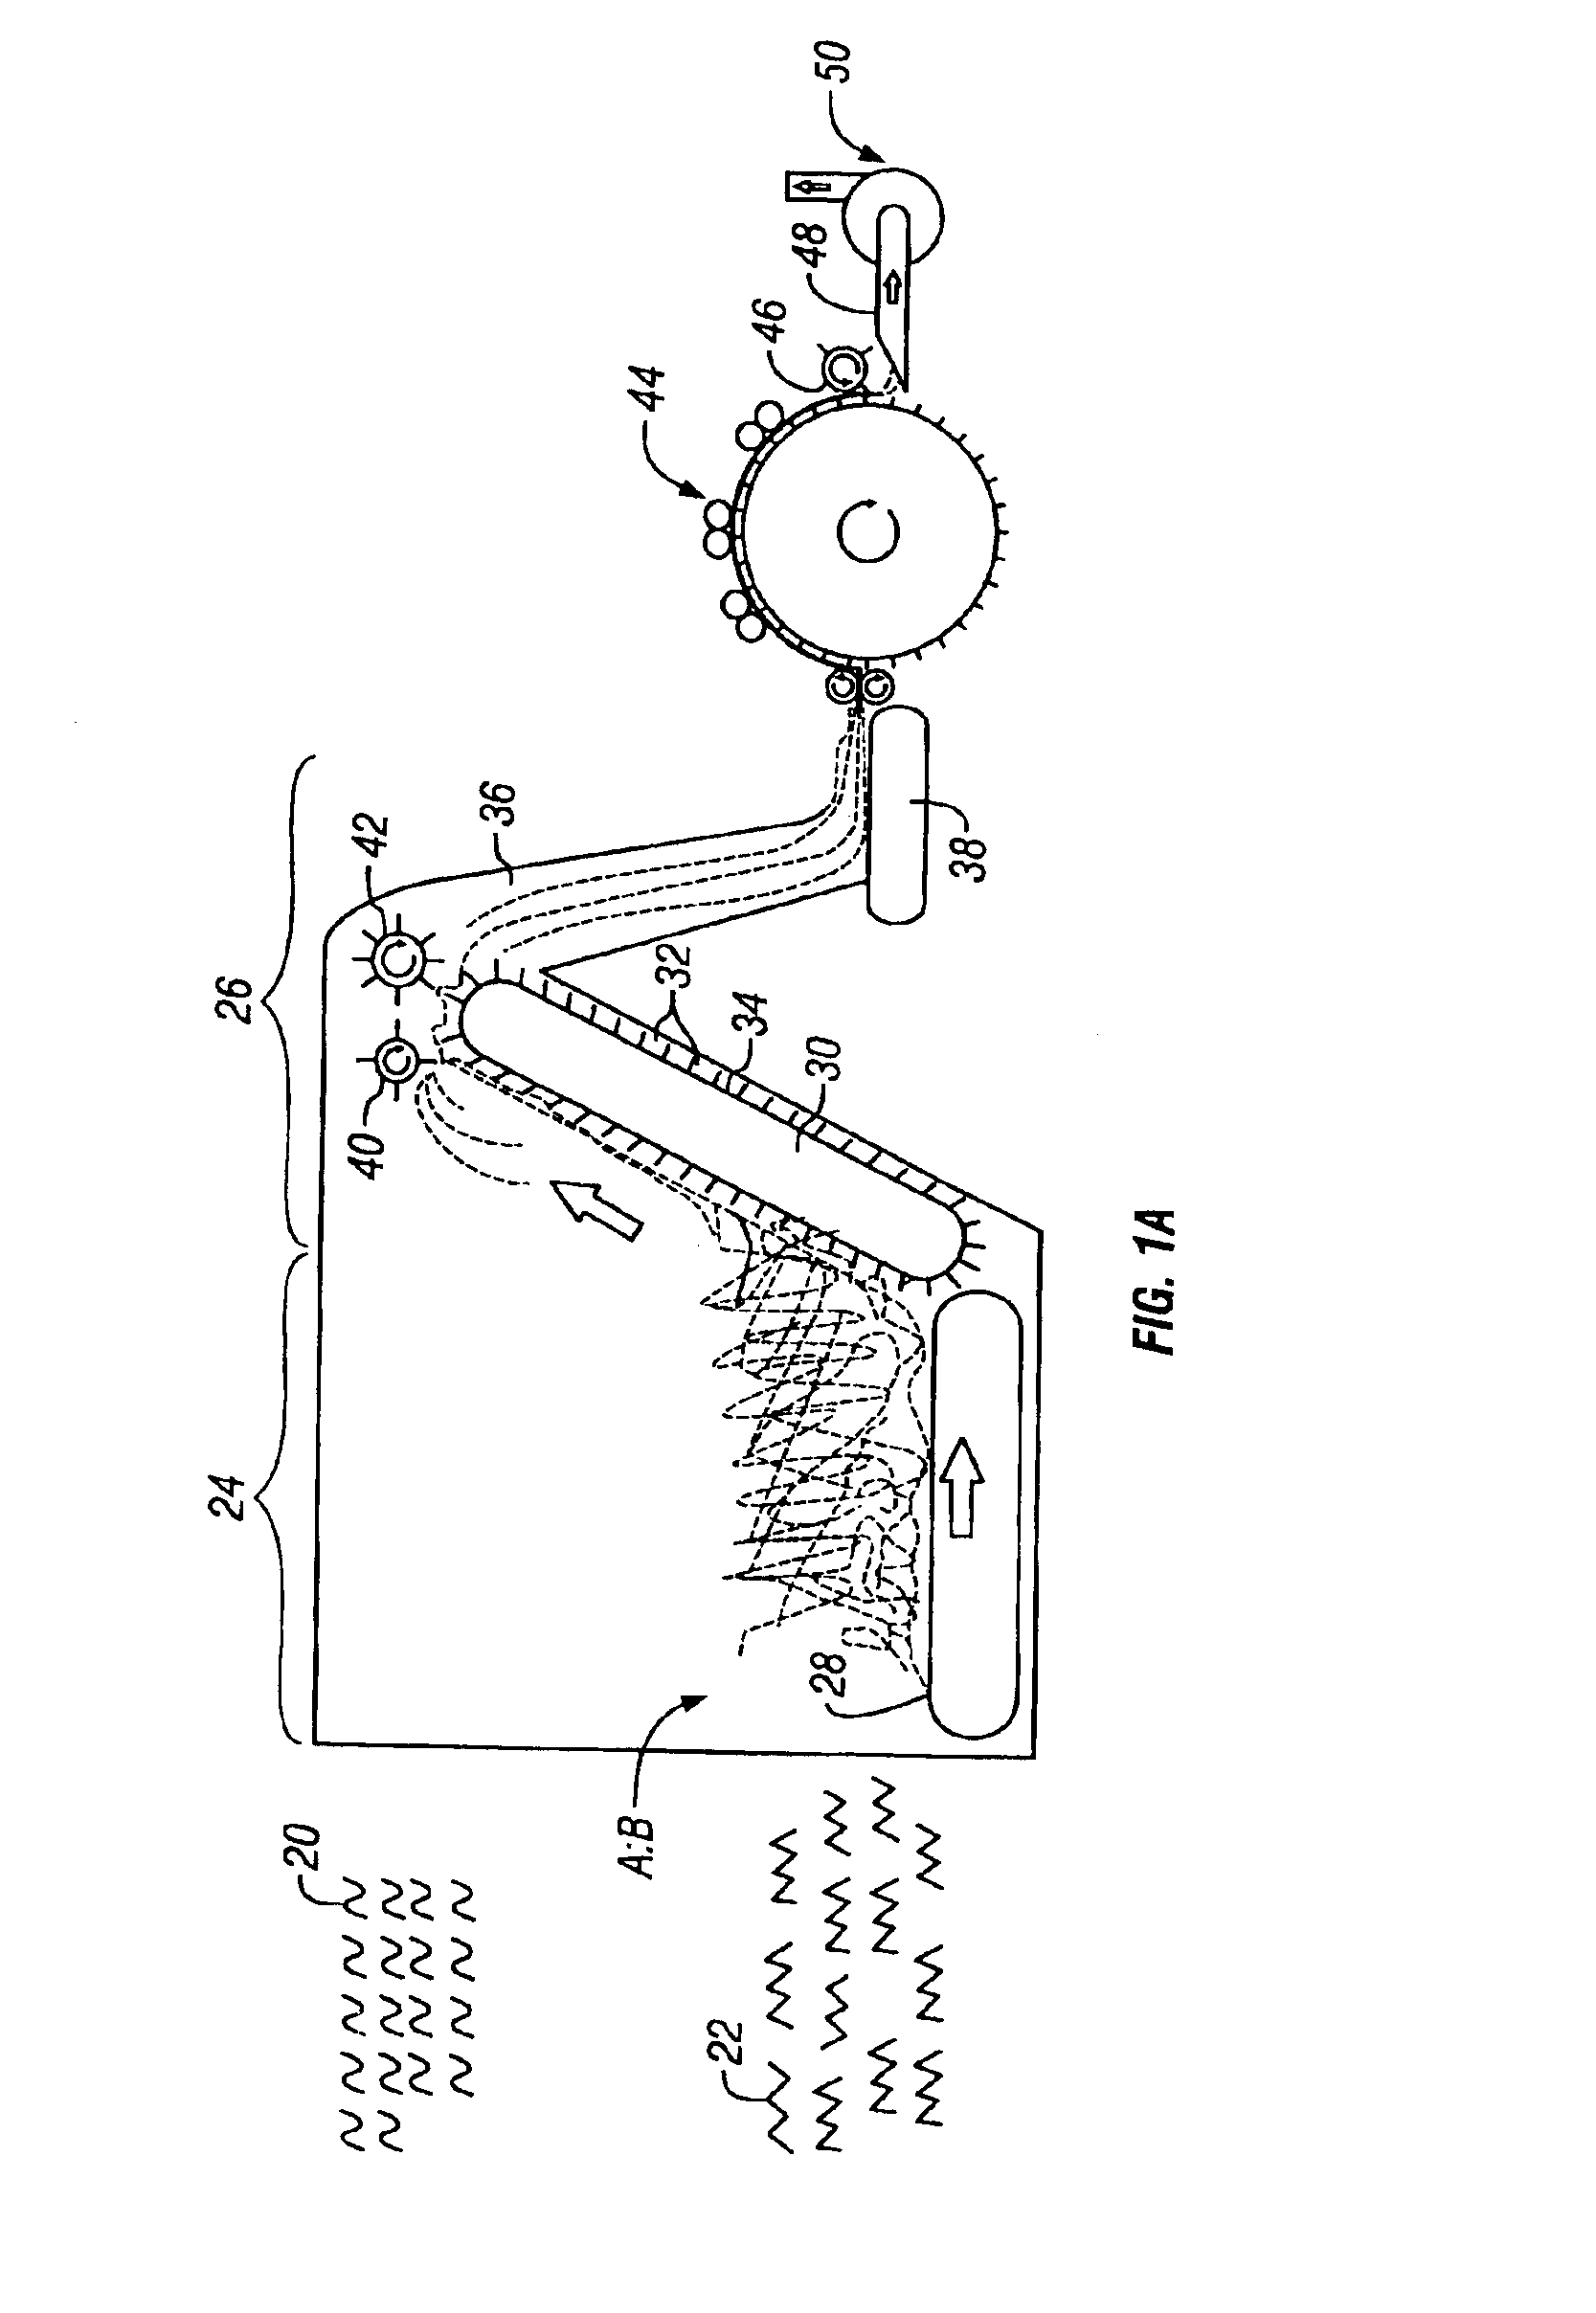 Composite nonwoven fabric and method for making same